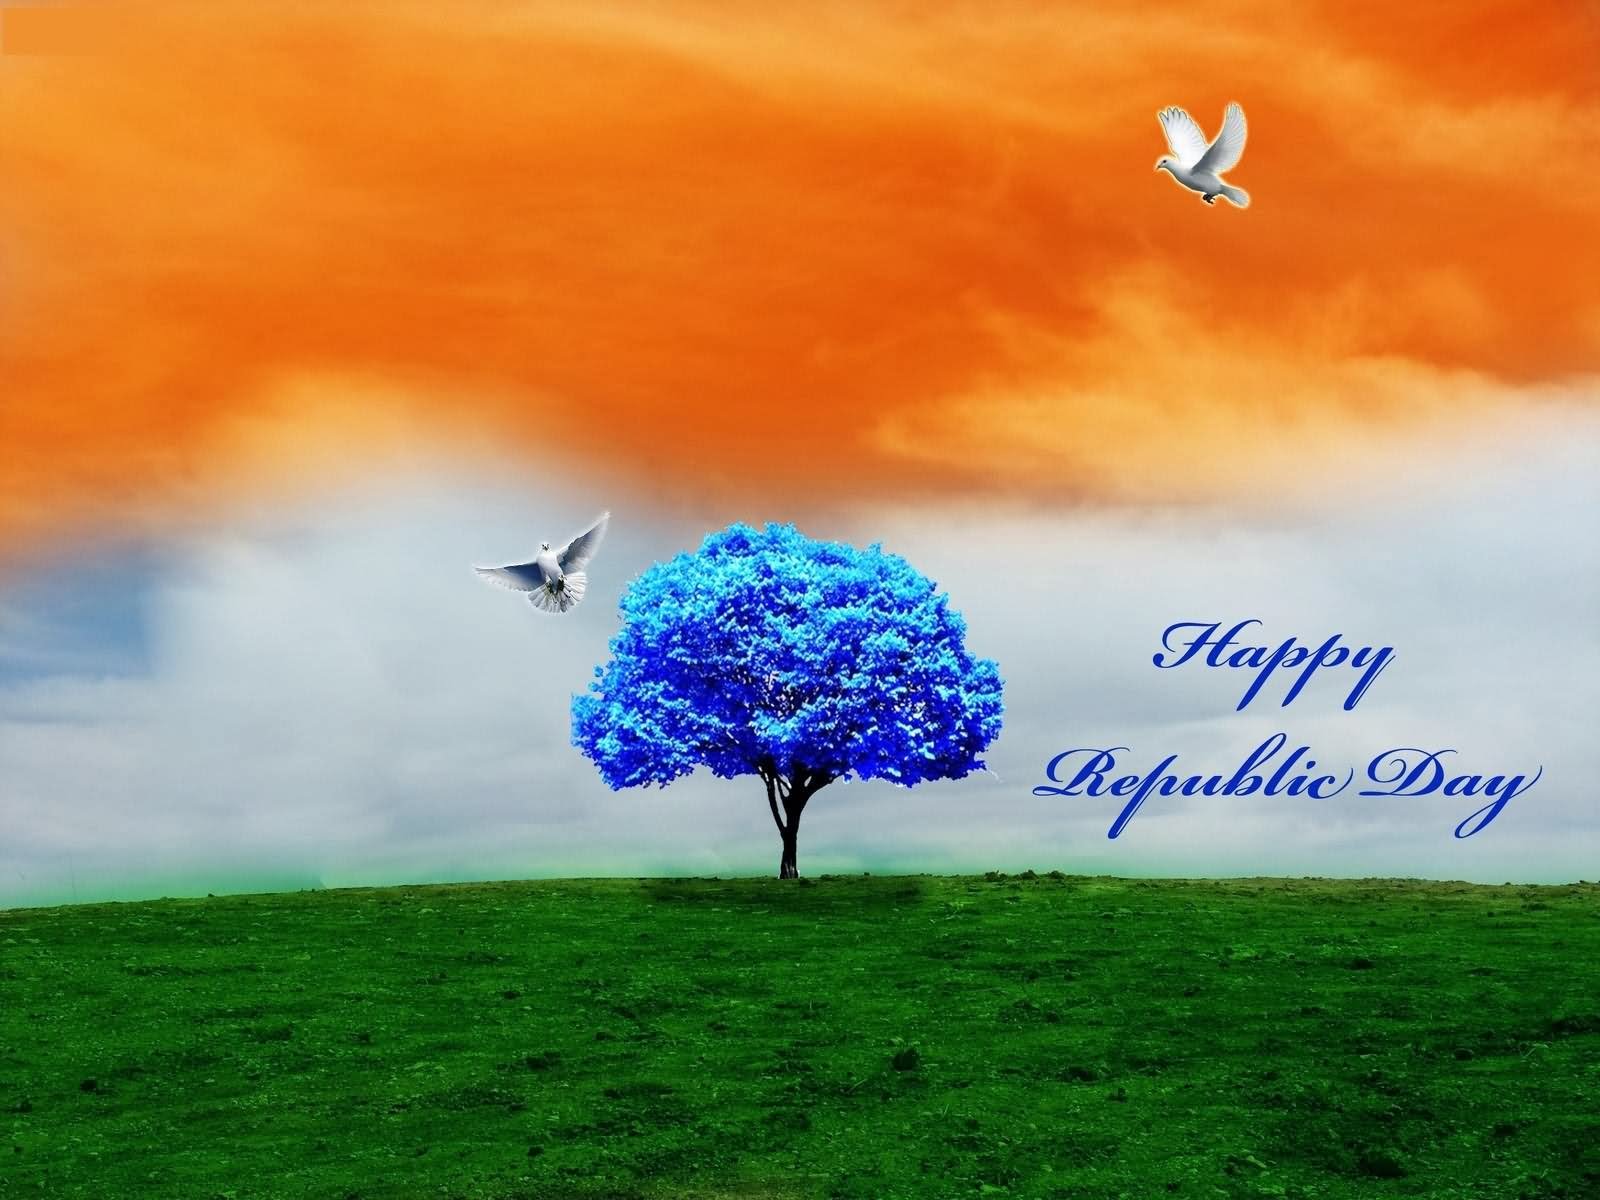 Happy Republic Day 2022 HD Wallpapers - Wallpaper Cave